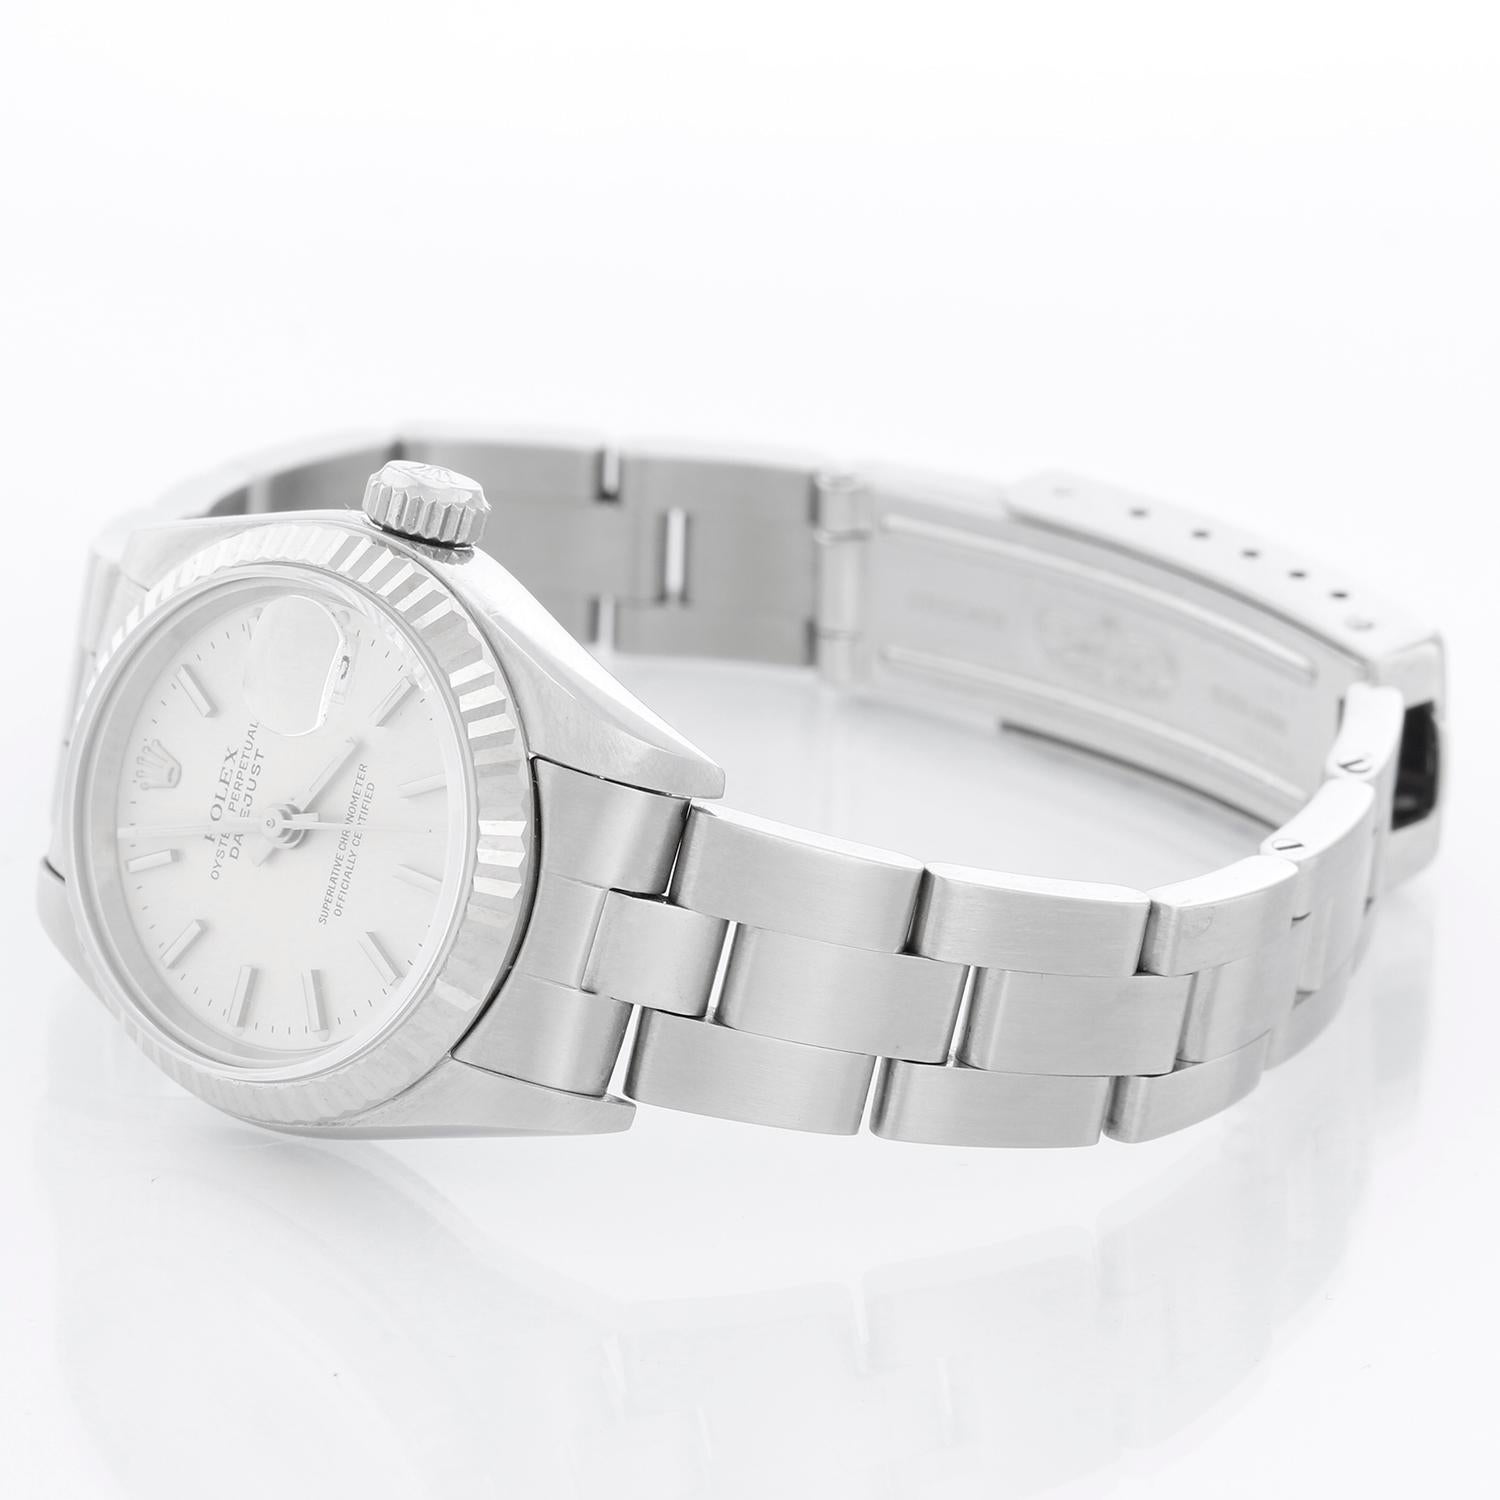 Rolex Ladies Datejust Stainless Steel Watch 69174 - Automatic winding. Stainless steel case with 18k white gold fluted bezel . Silver dial with stick hour markers. Stainless steel Oyster bracelet. Pre-owned with custom box.